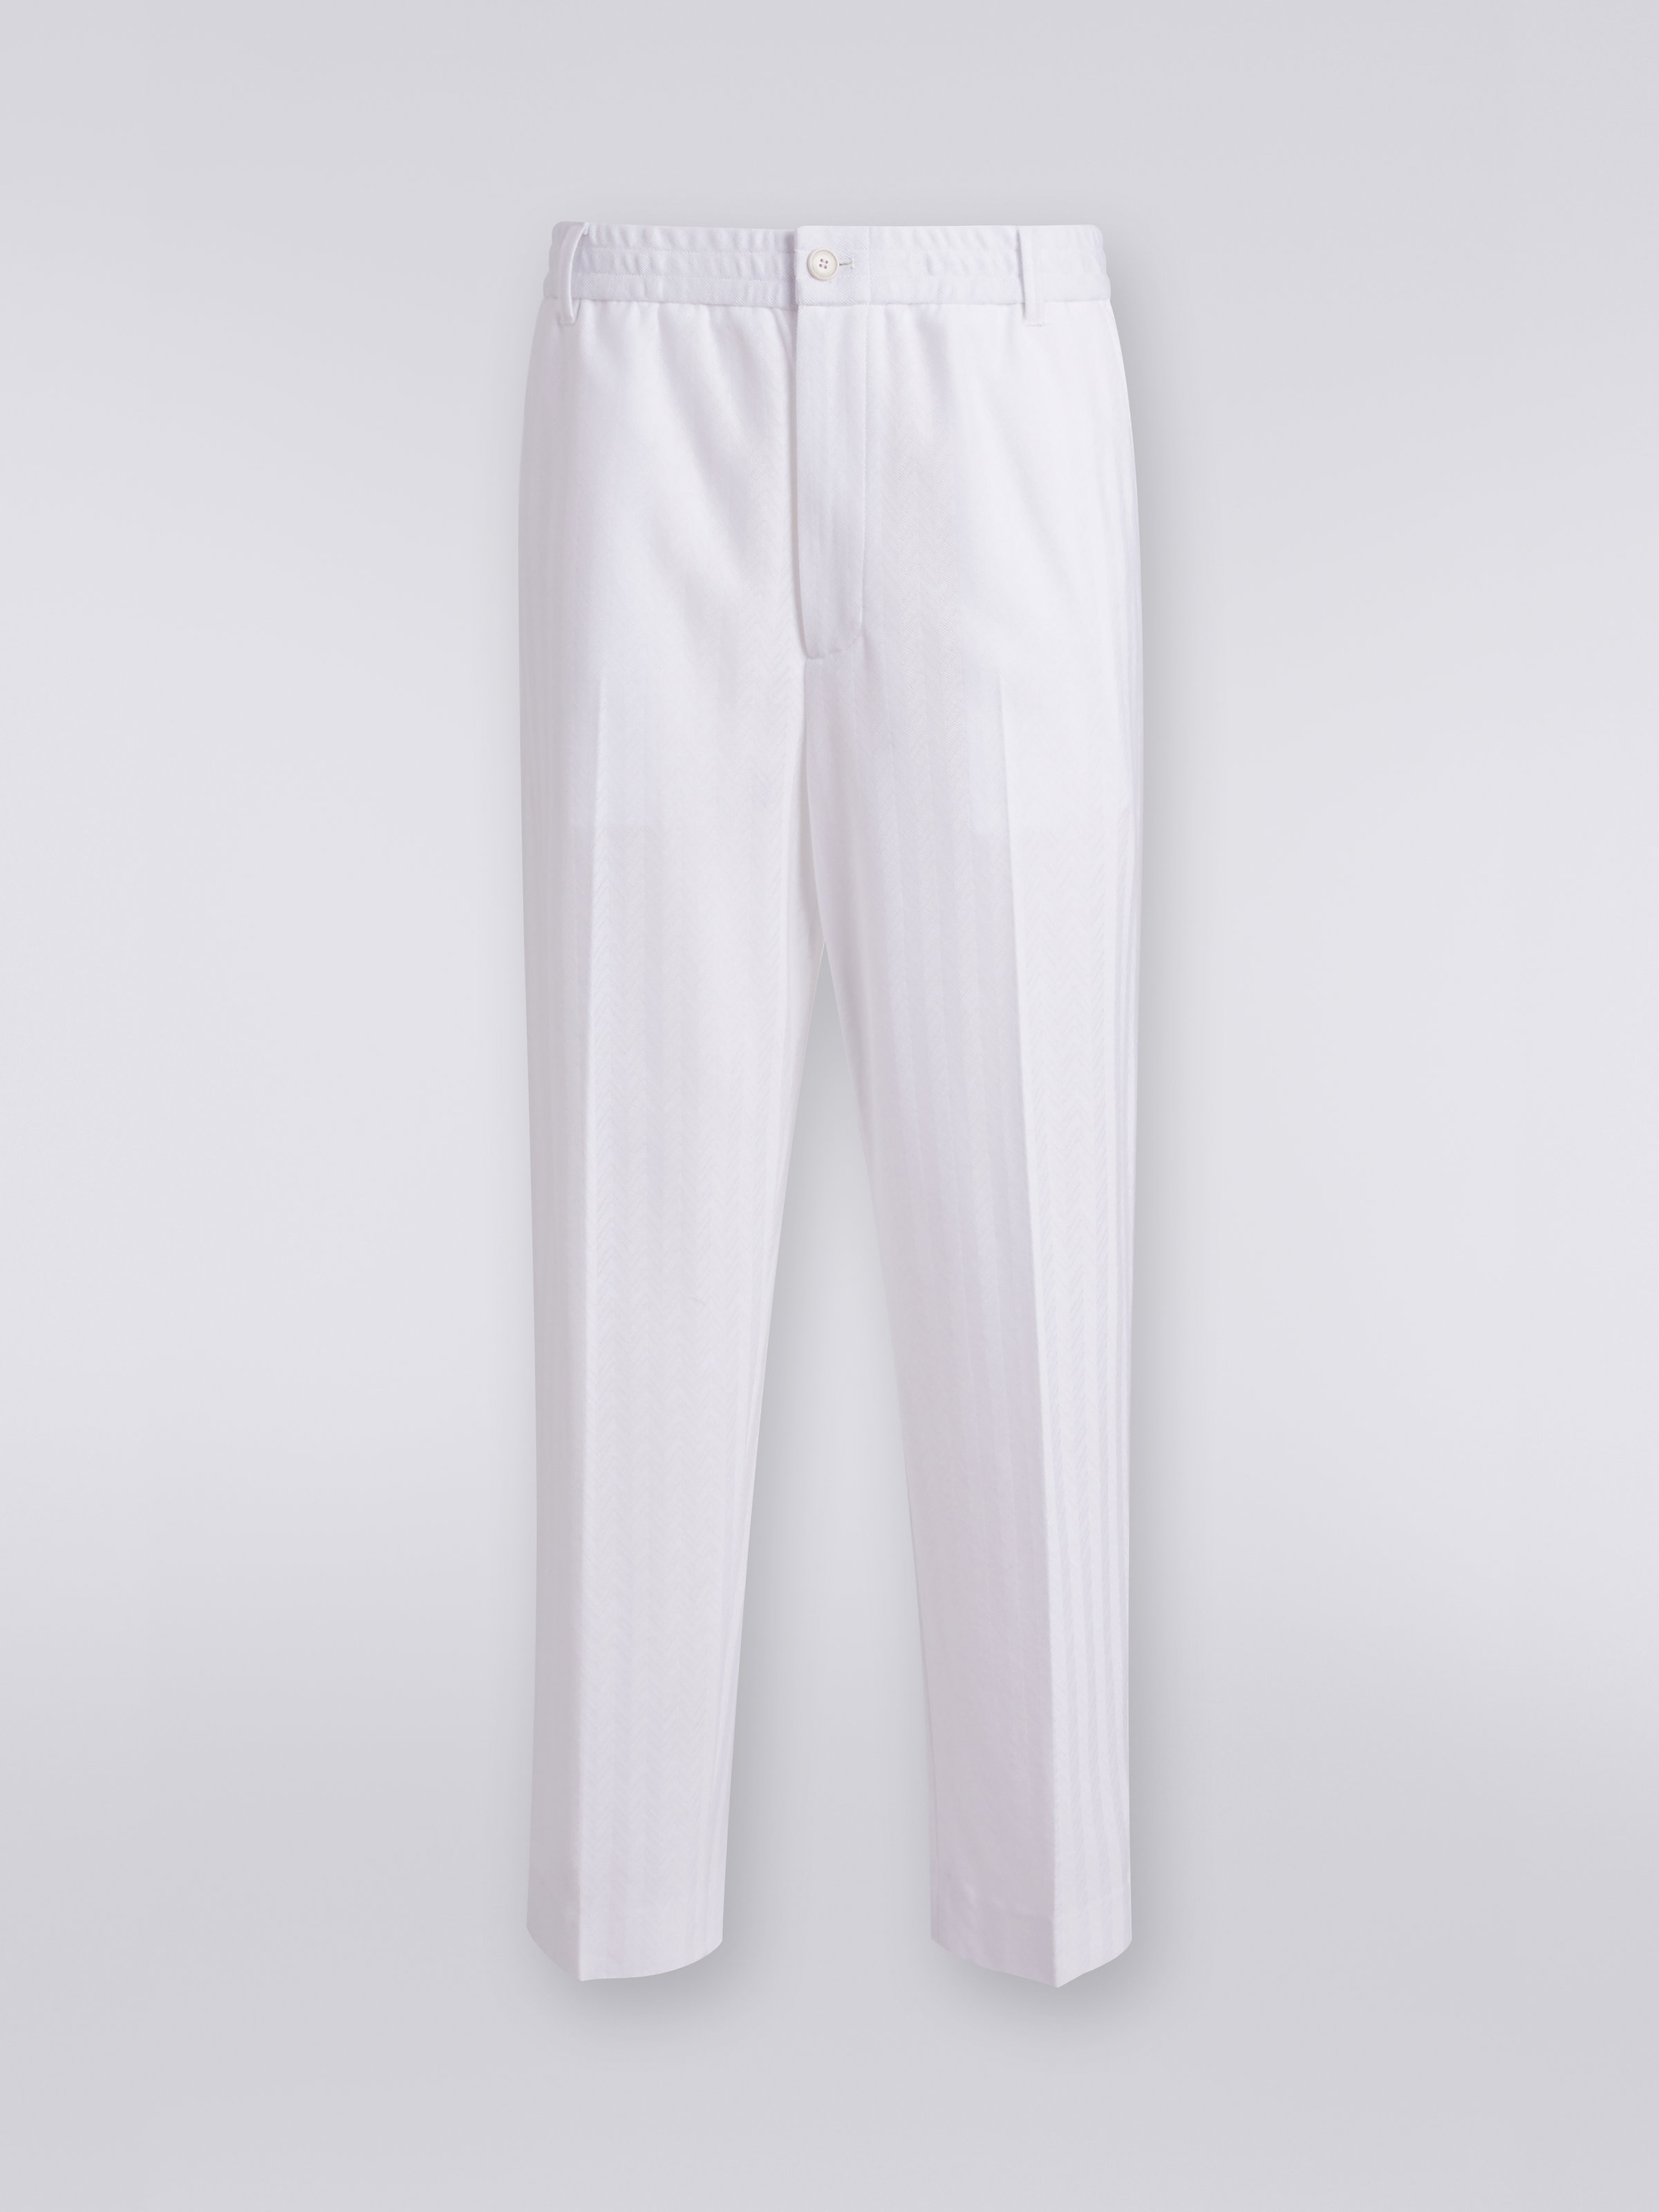 Viscose and cotton chevron trousers with ironed crease, White  - 0